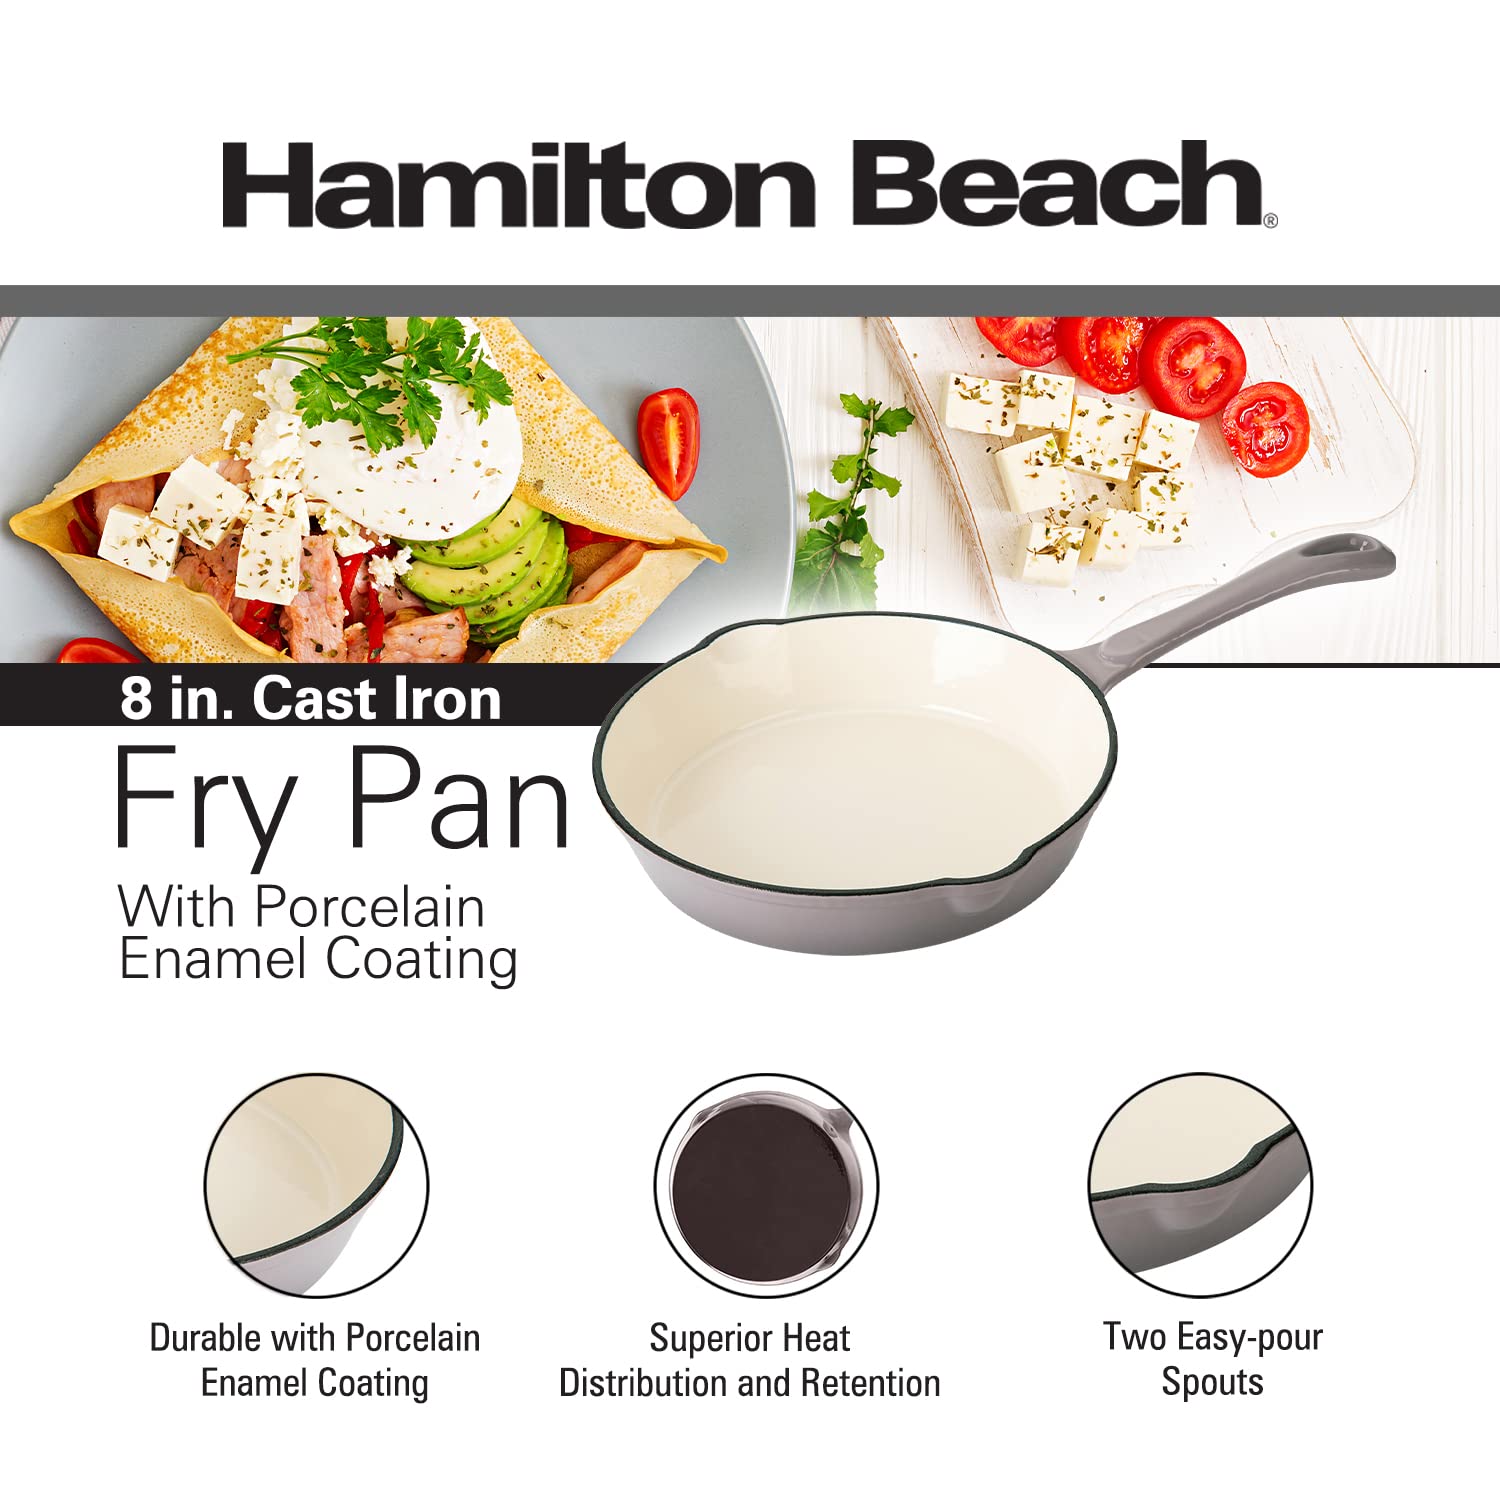 Hamilton Beach 8-Inch Nonstick Aluminum Fry Pan with Marble Coating,  Wood-Like Handle, Dishwasher Safe